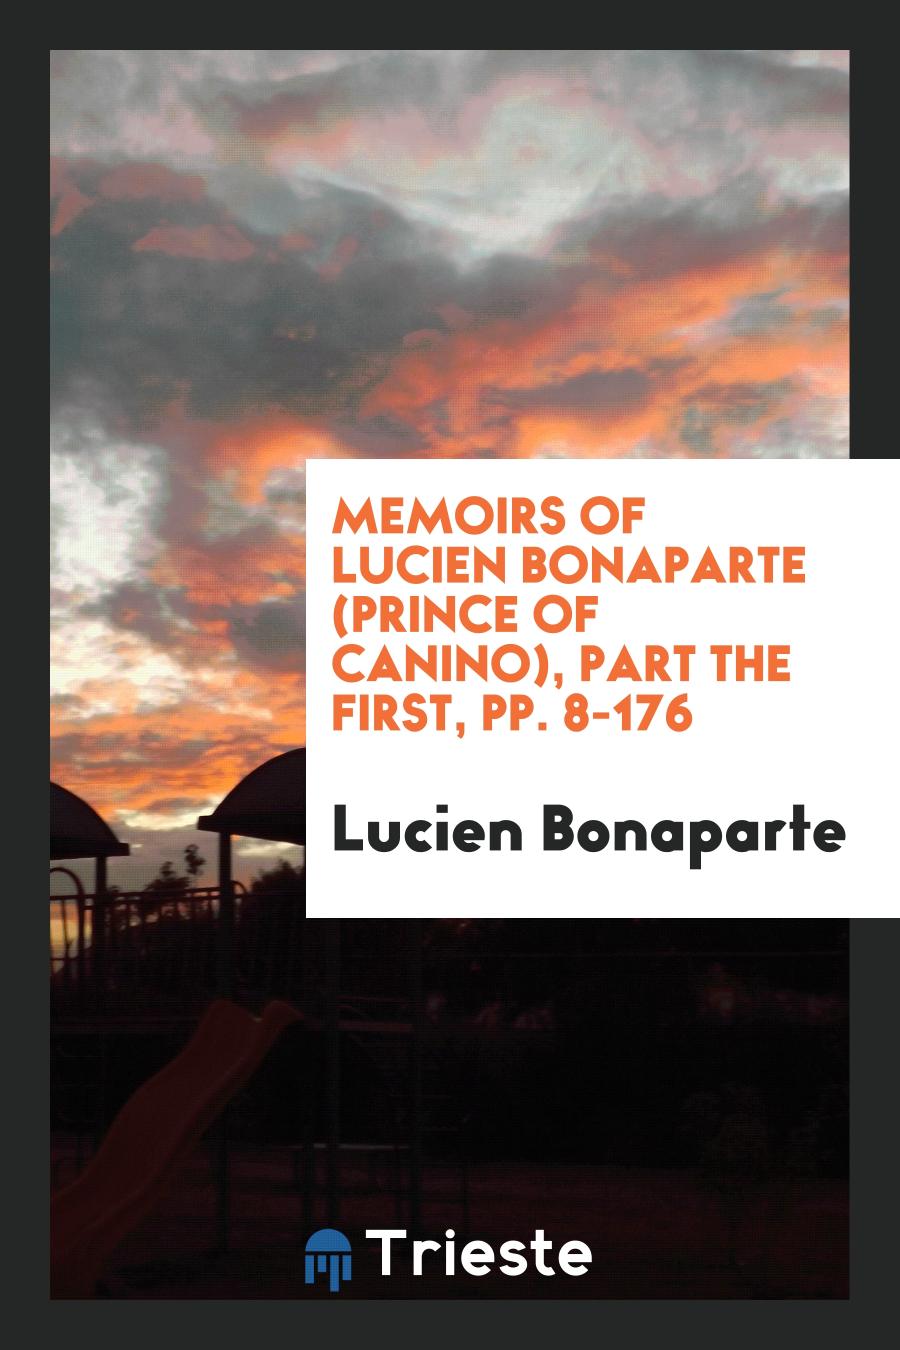 Memoirs of Lucien Bonaparte (Prince of Canino), Part the First, pp. 8-176